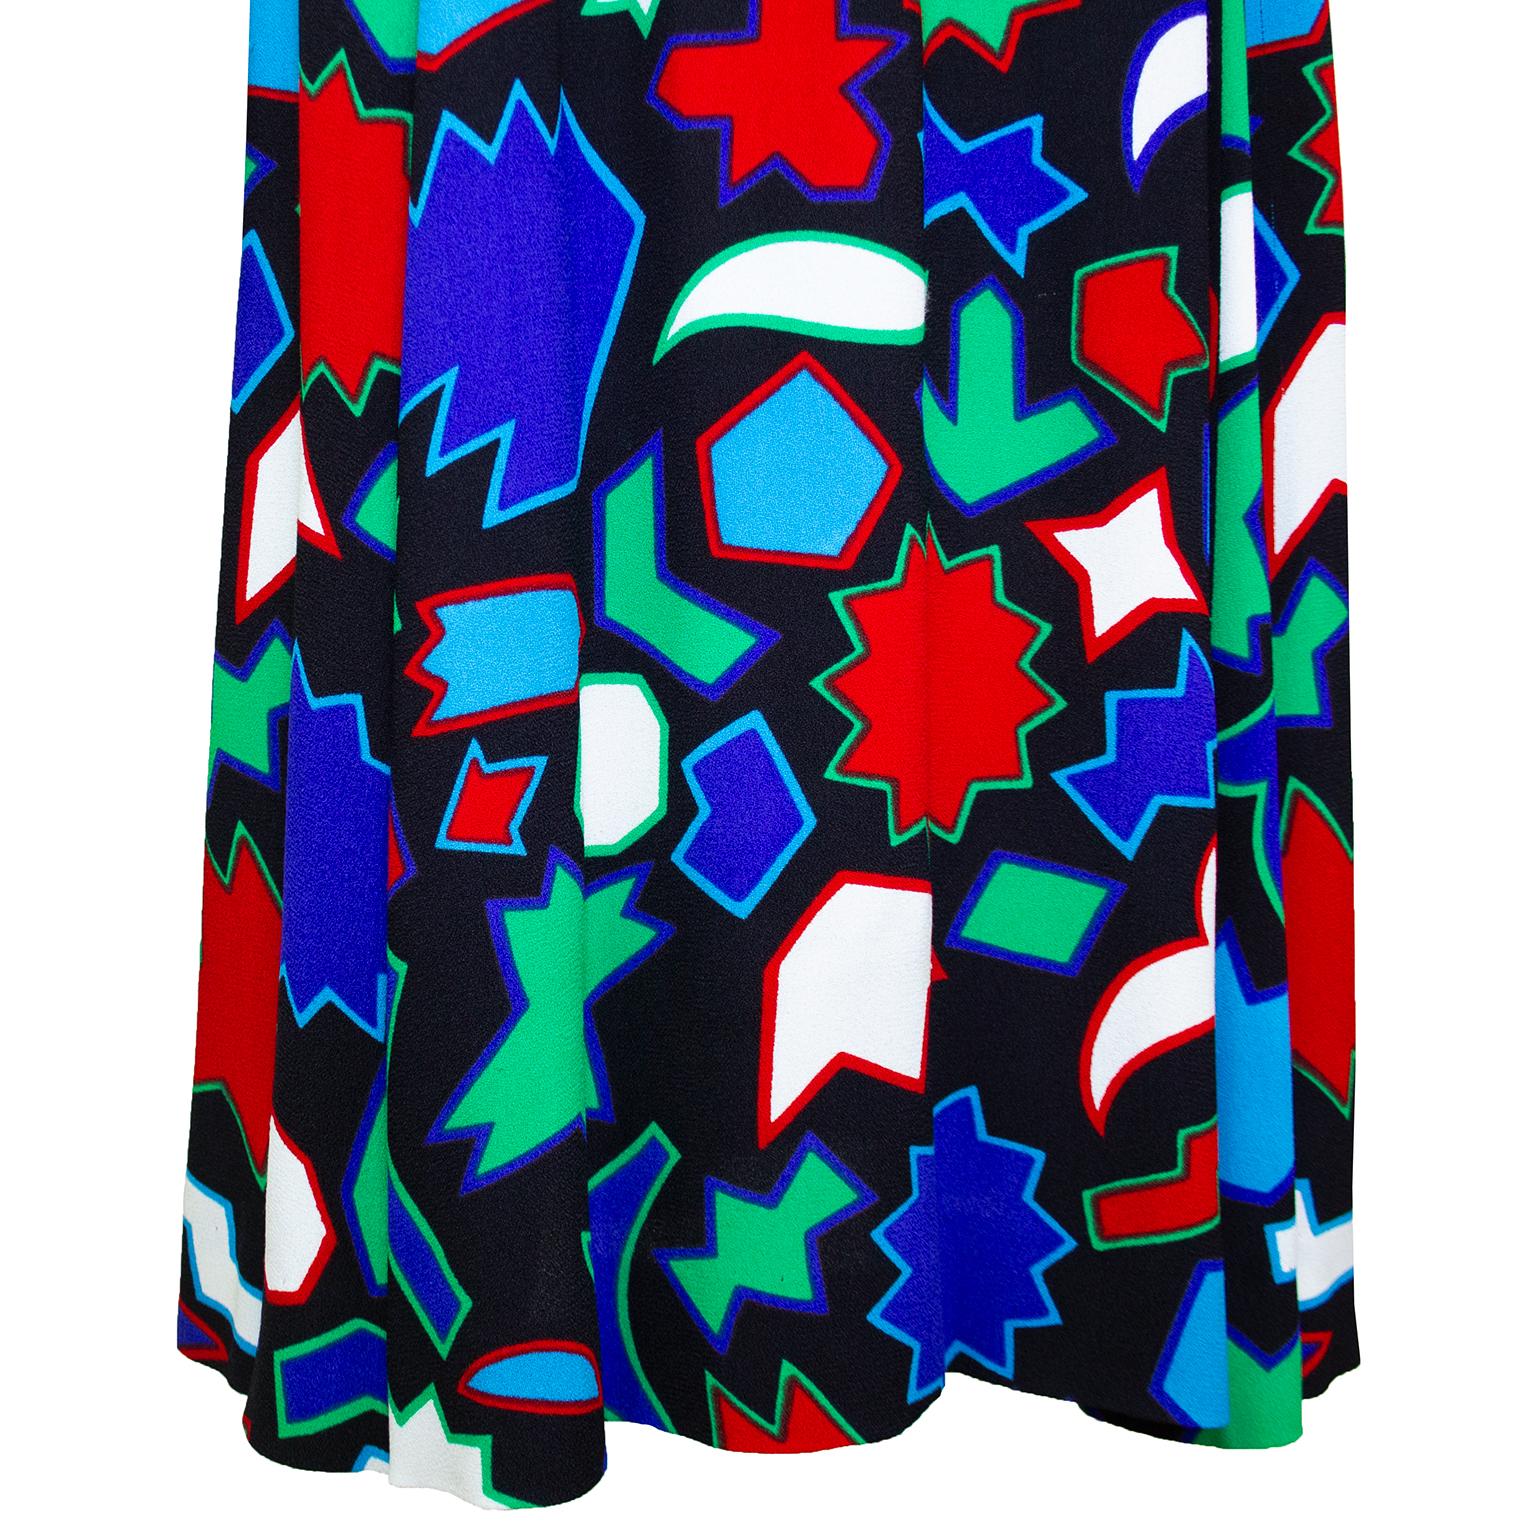 1980s Yves Saint Laurent Geometric Print Dress  In Fair Condition For Sale In Toronto, Ontario